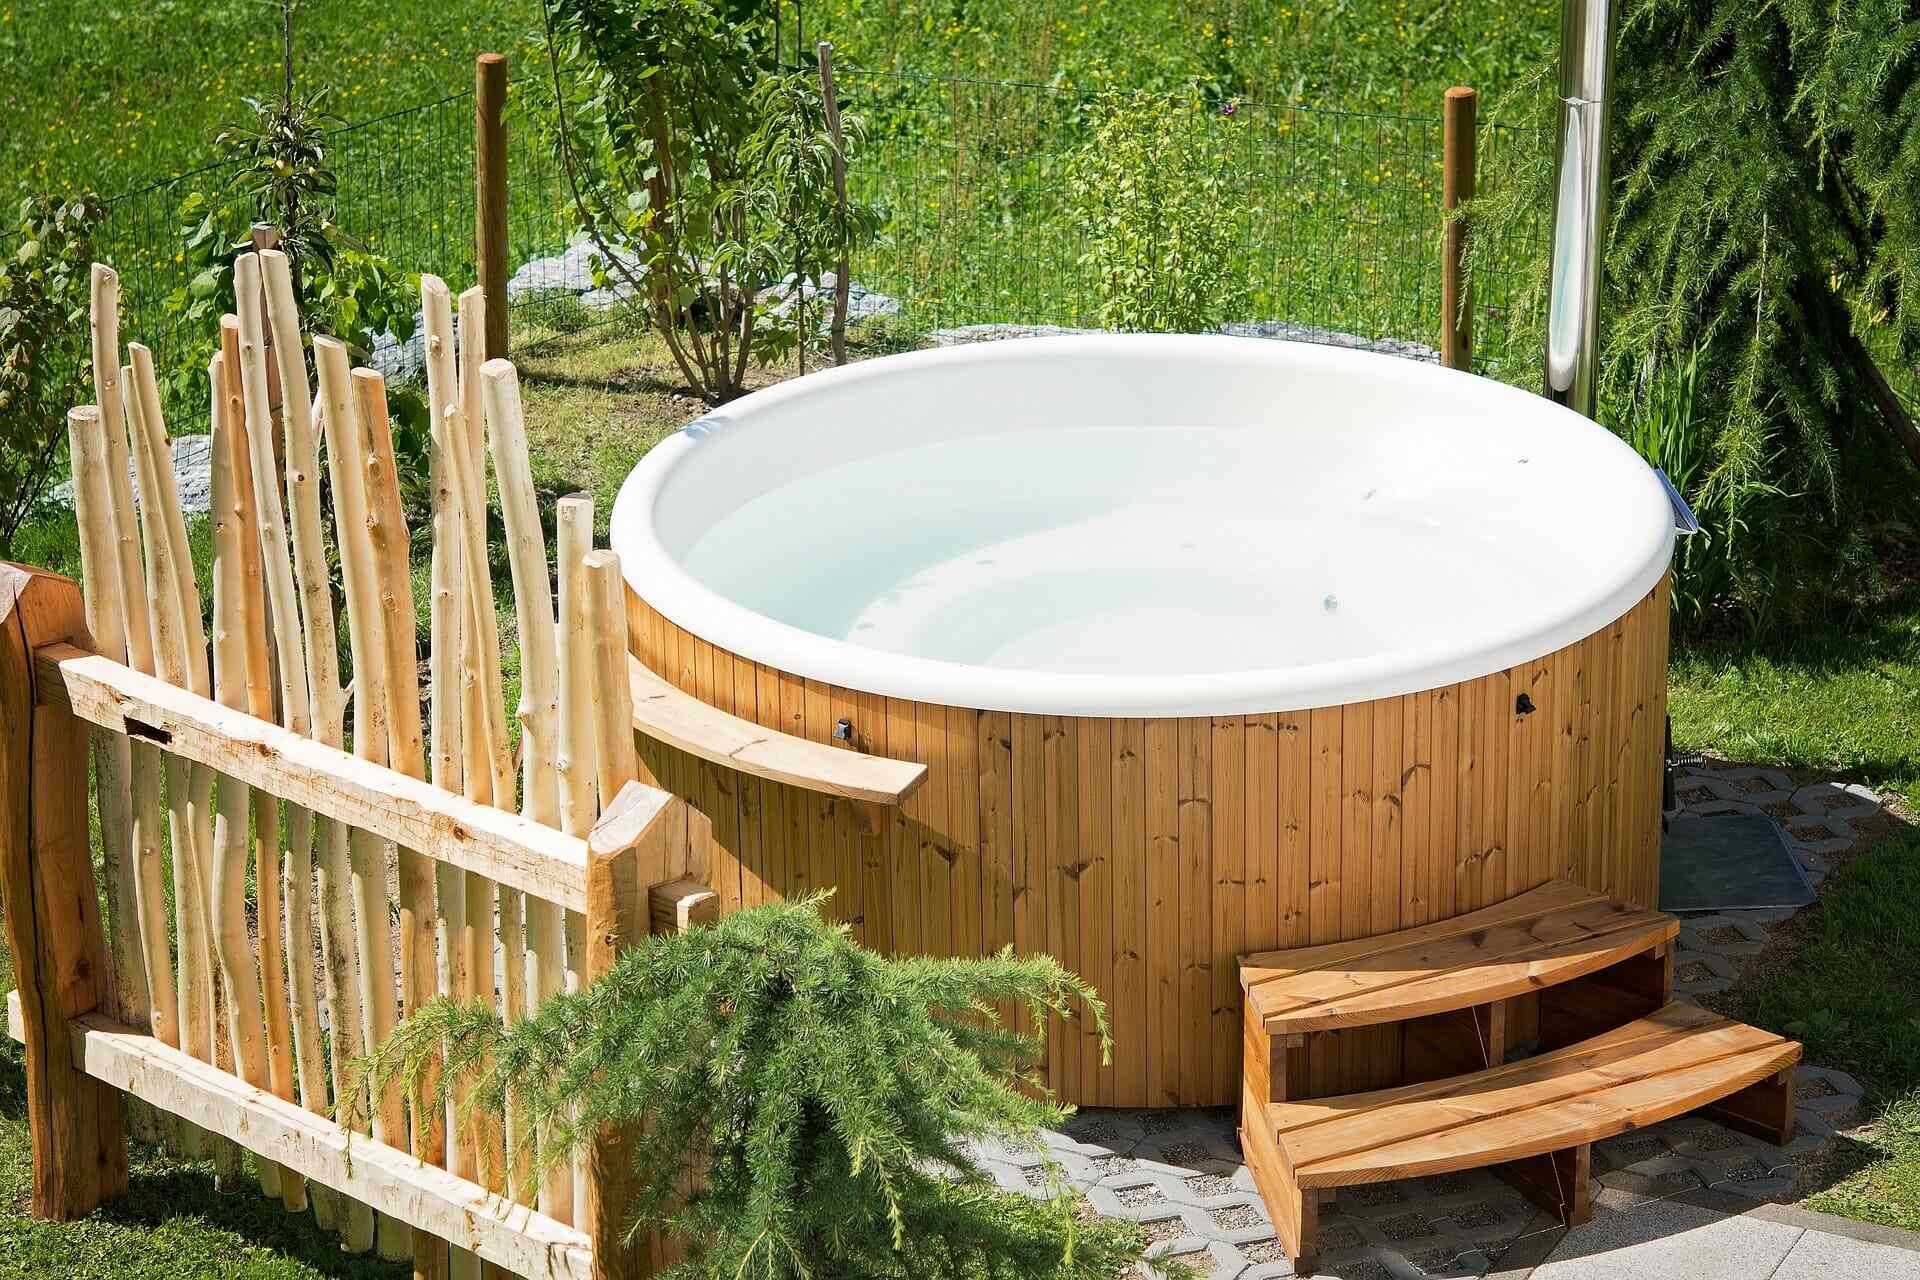 How To Waterproof A Wooden Hot Tub